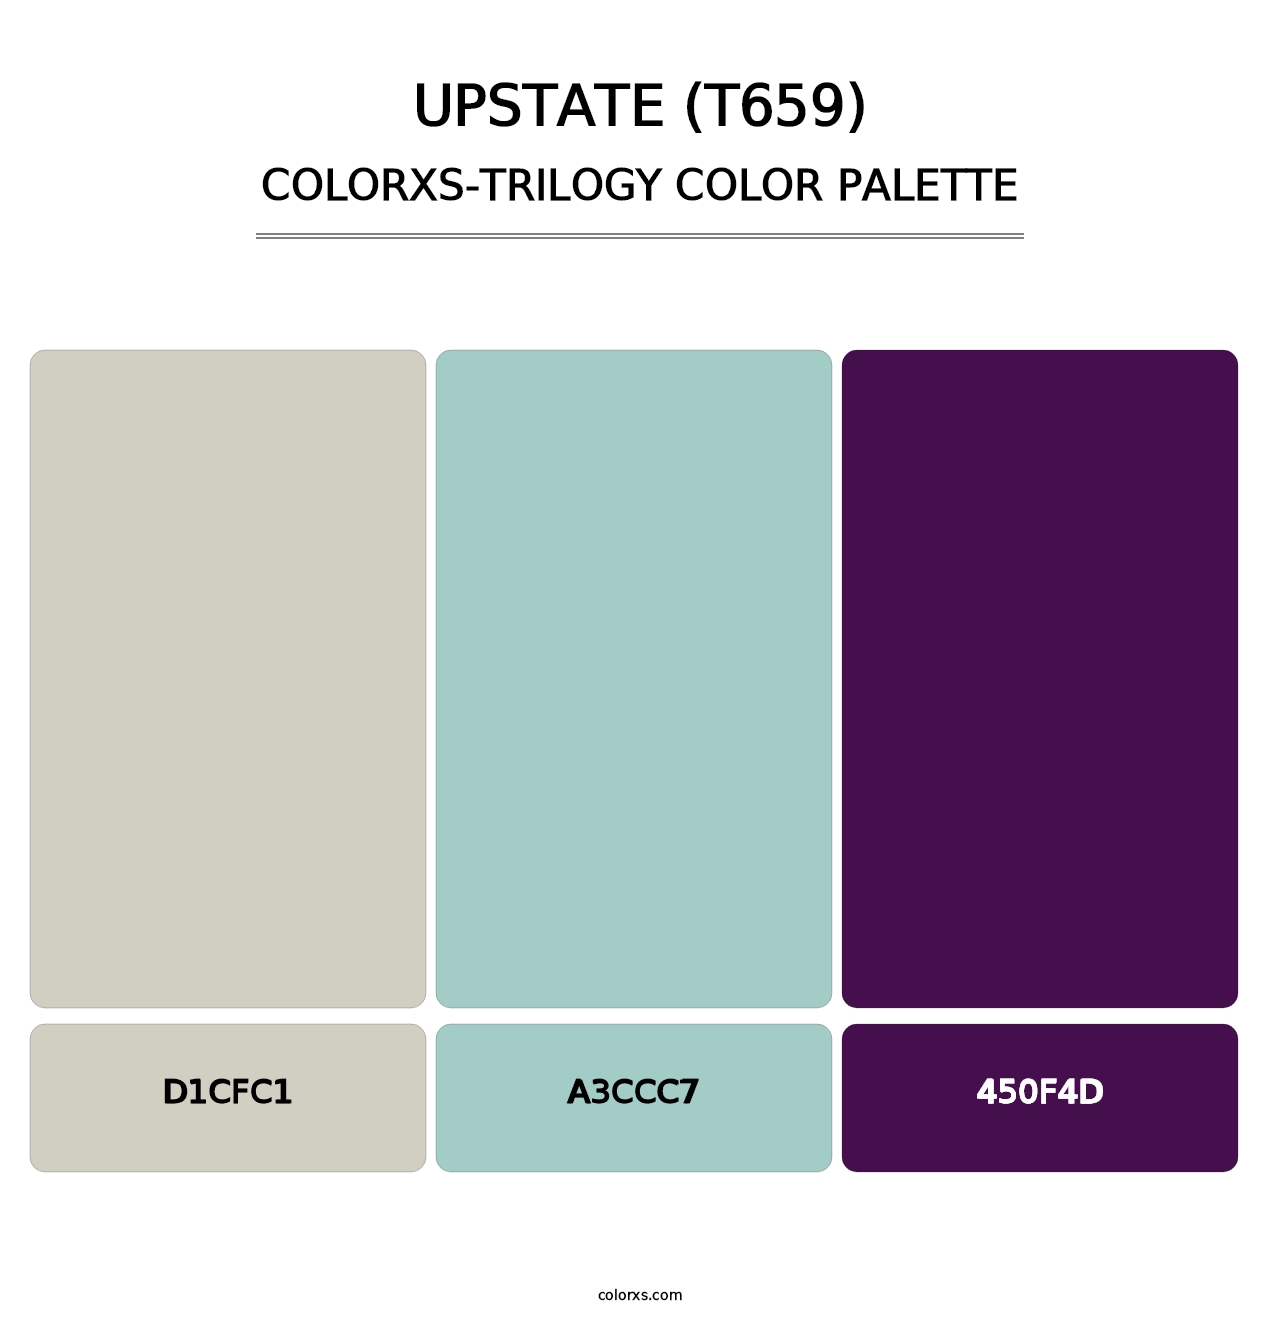 Upstate (T659) - Colorxs Trilogy Palette